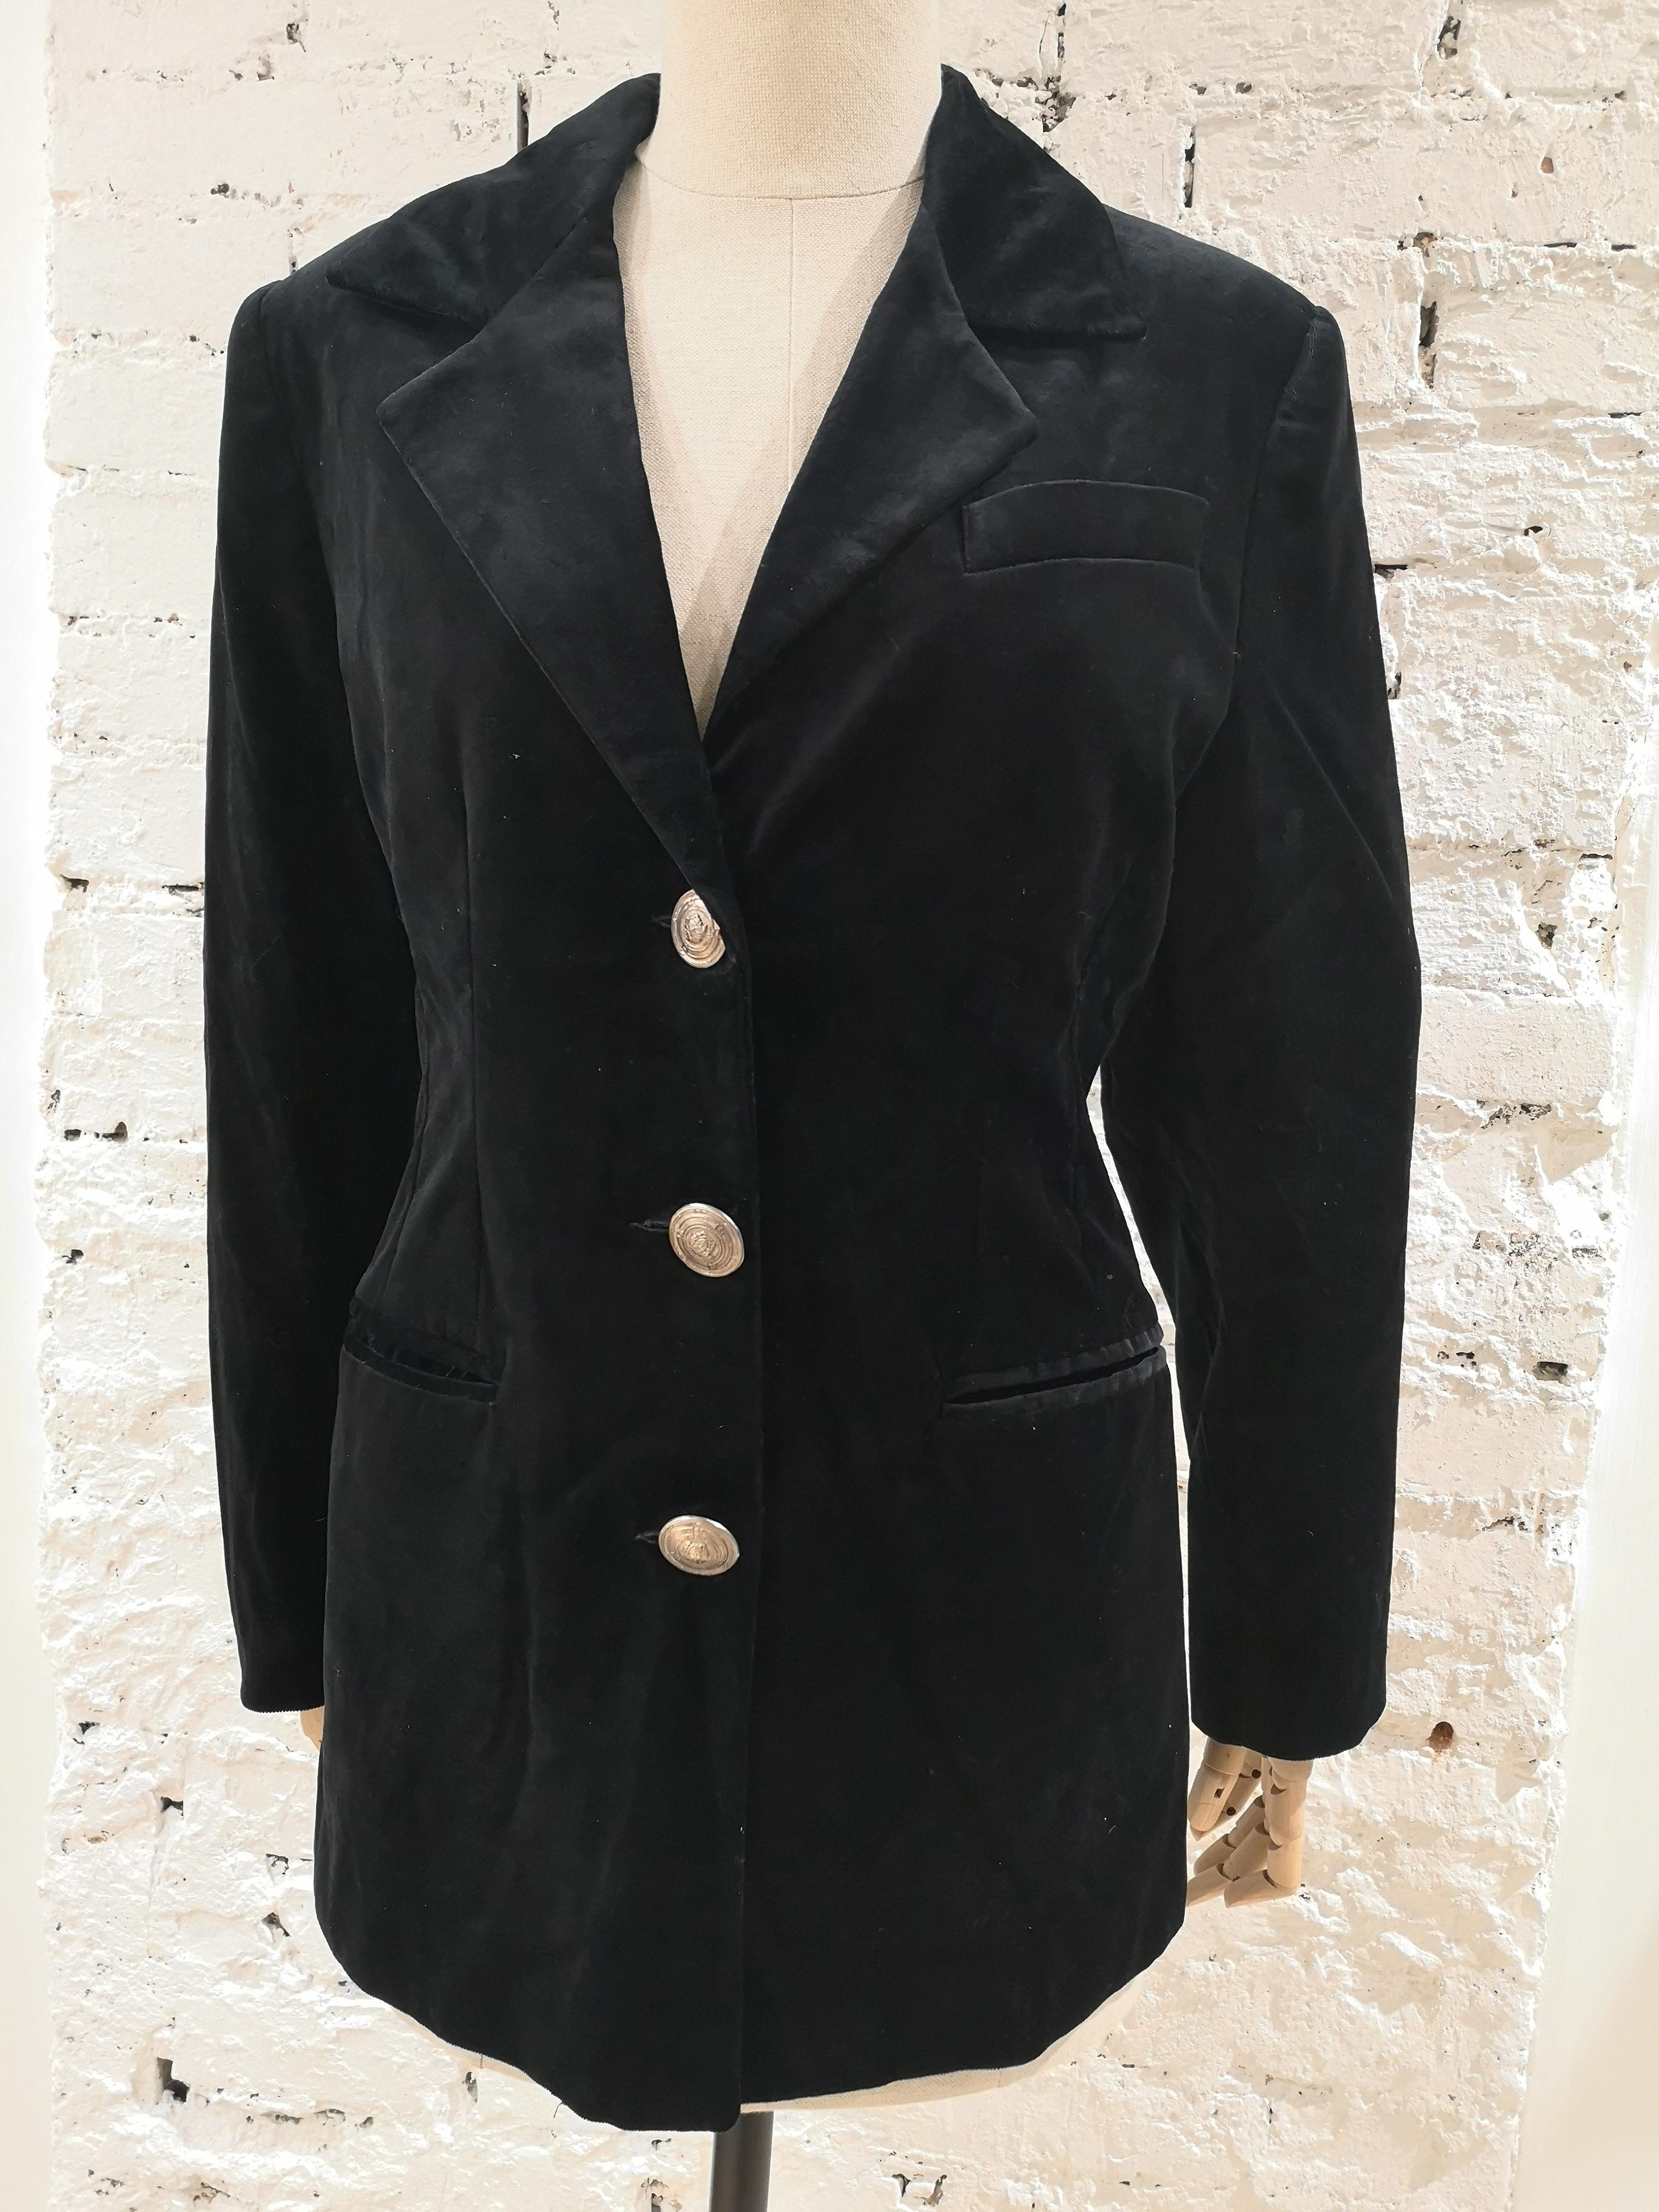 Versace black velvet blazer embellished with silver logo buttons
totally made in italy in size 44
